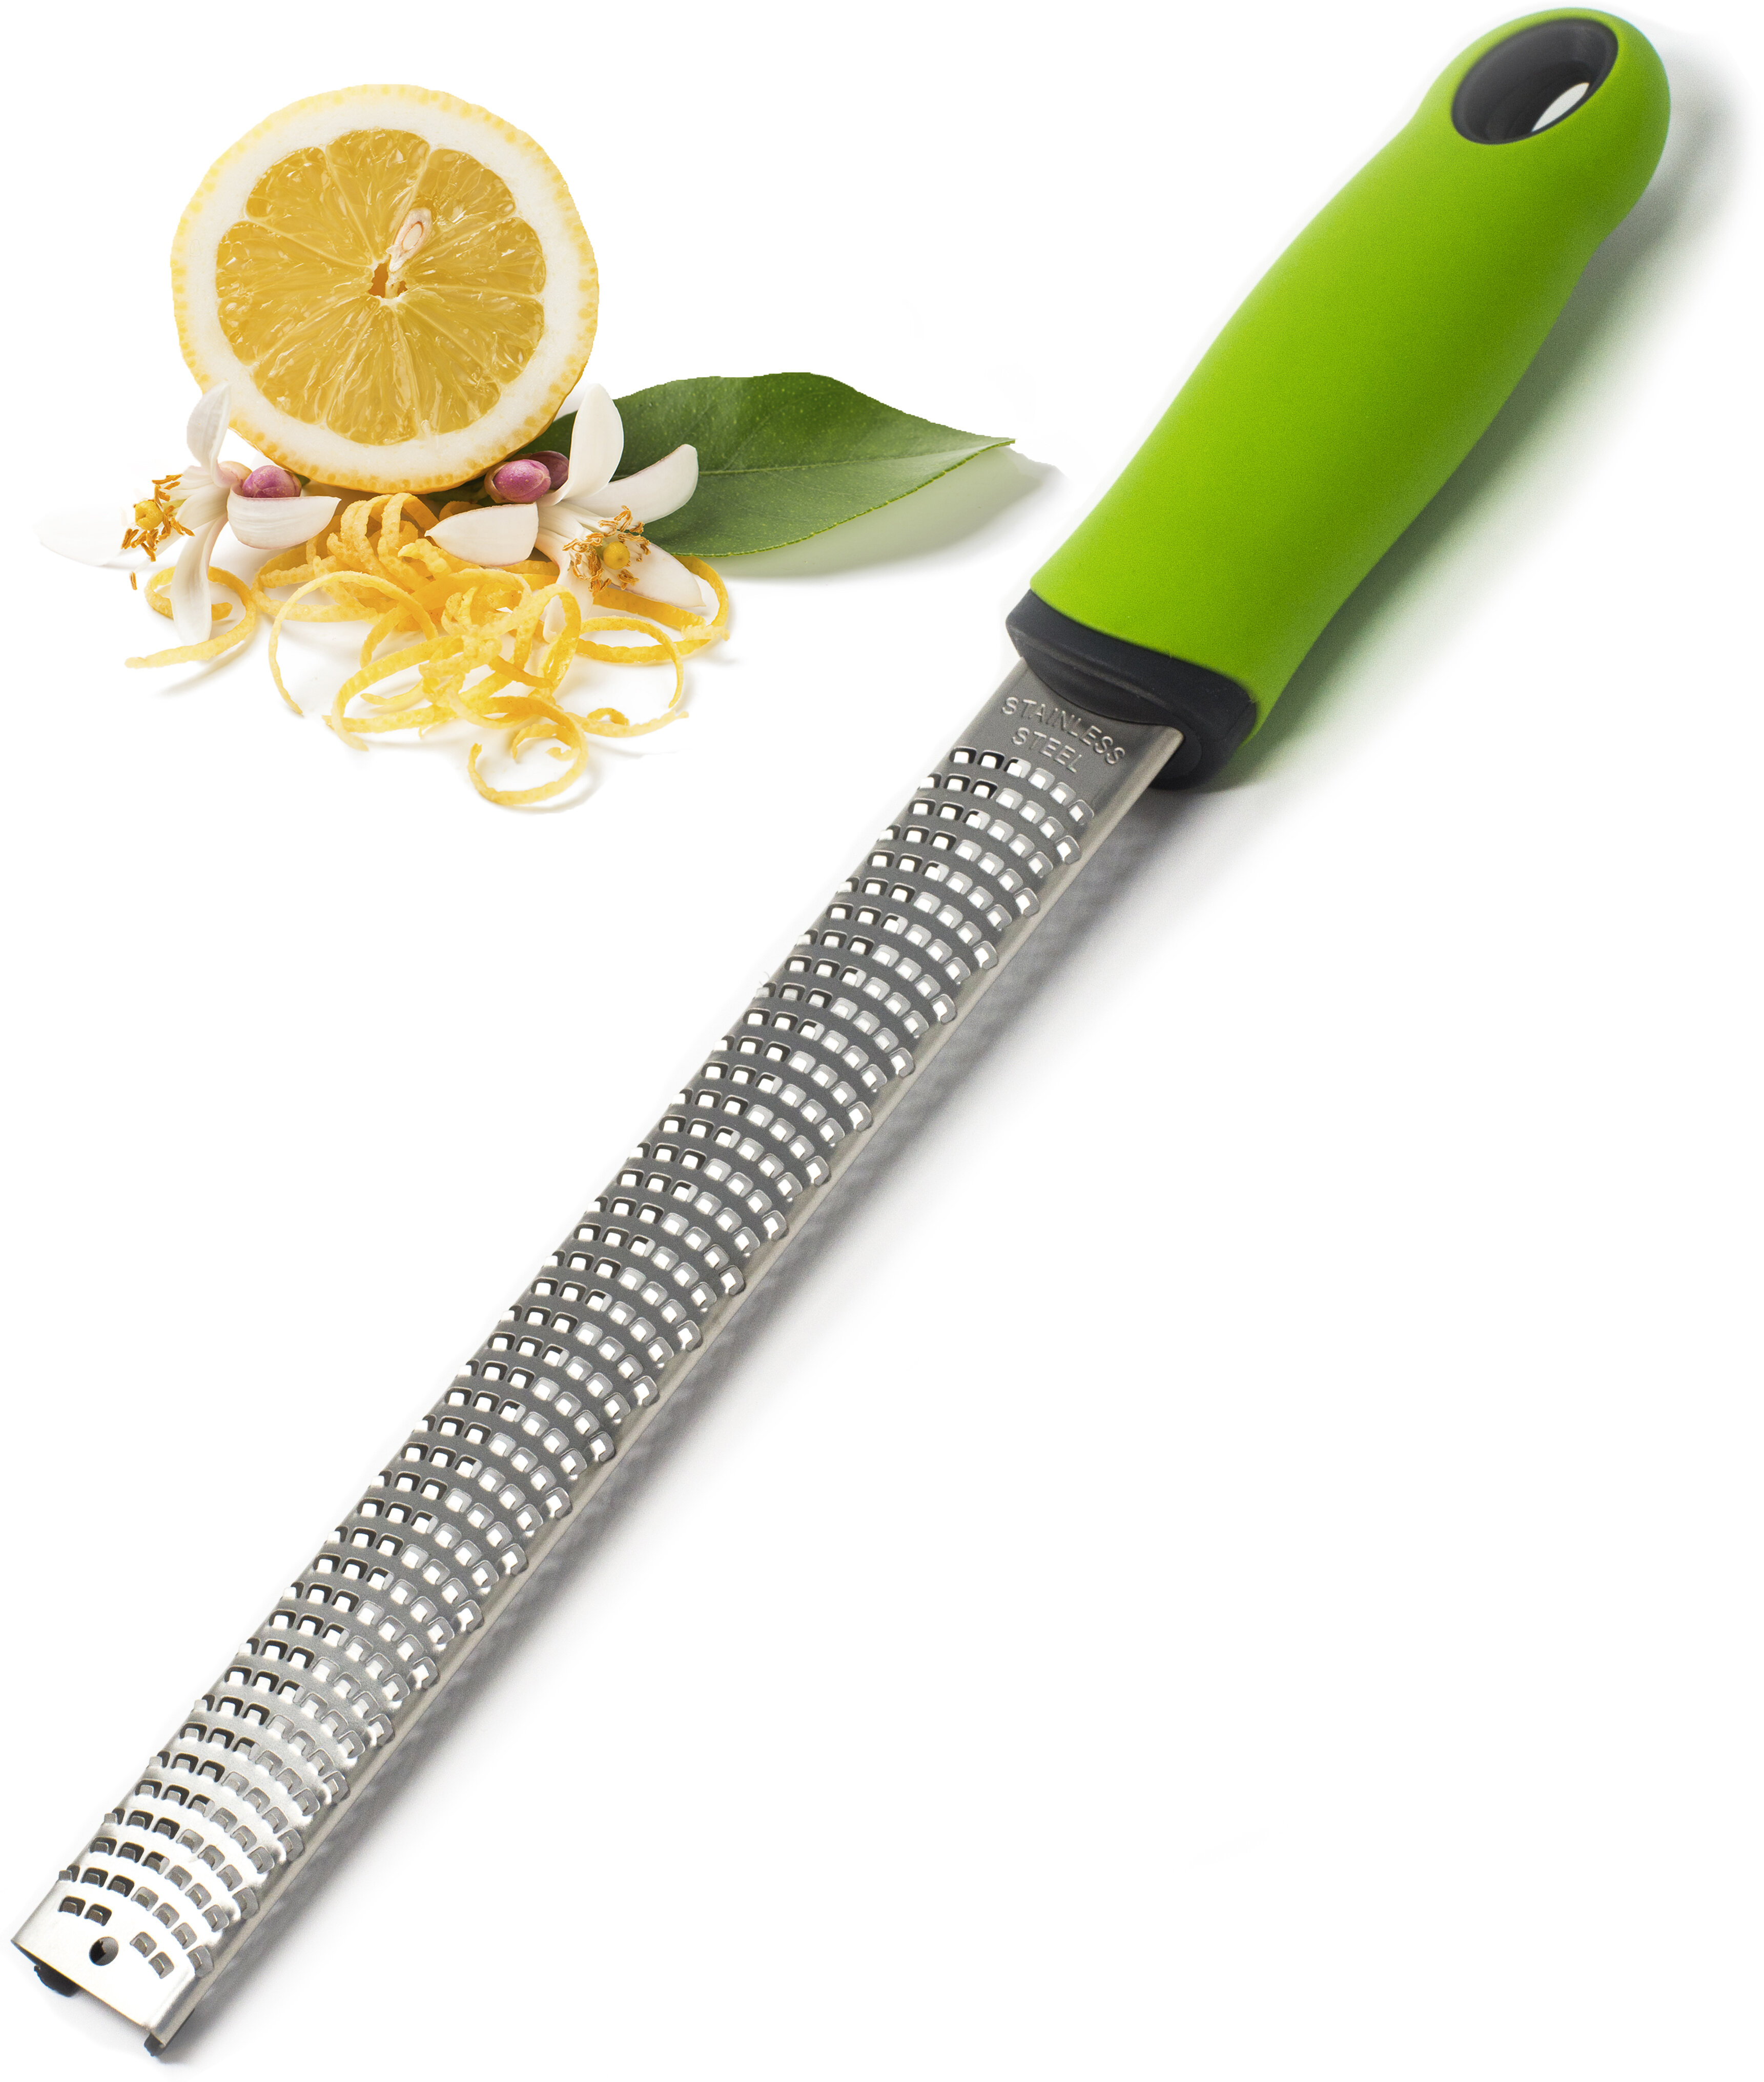 Yellow Hand held Zester stores up to a third cup of zest Home & Garden